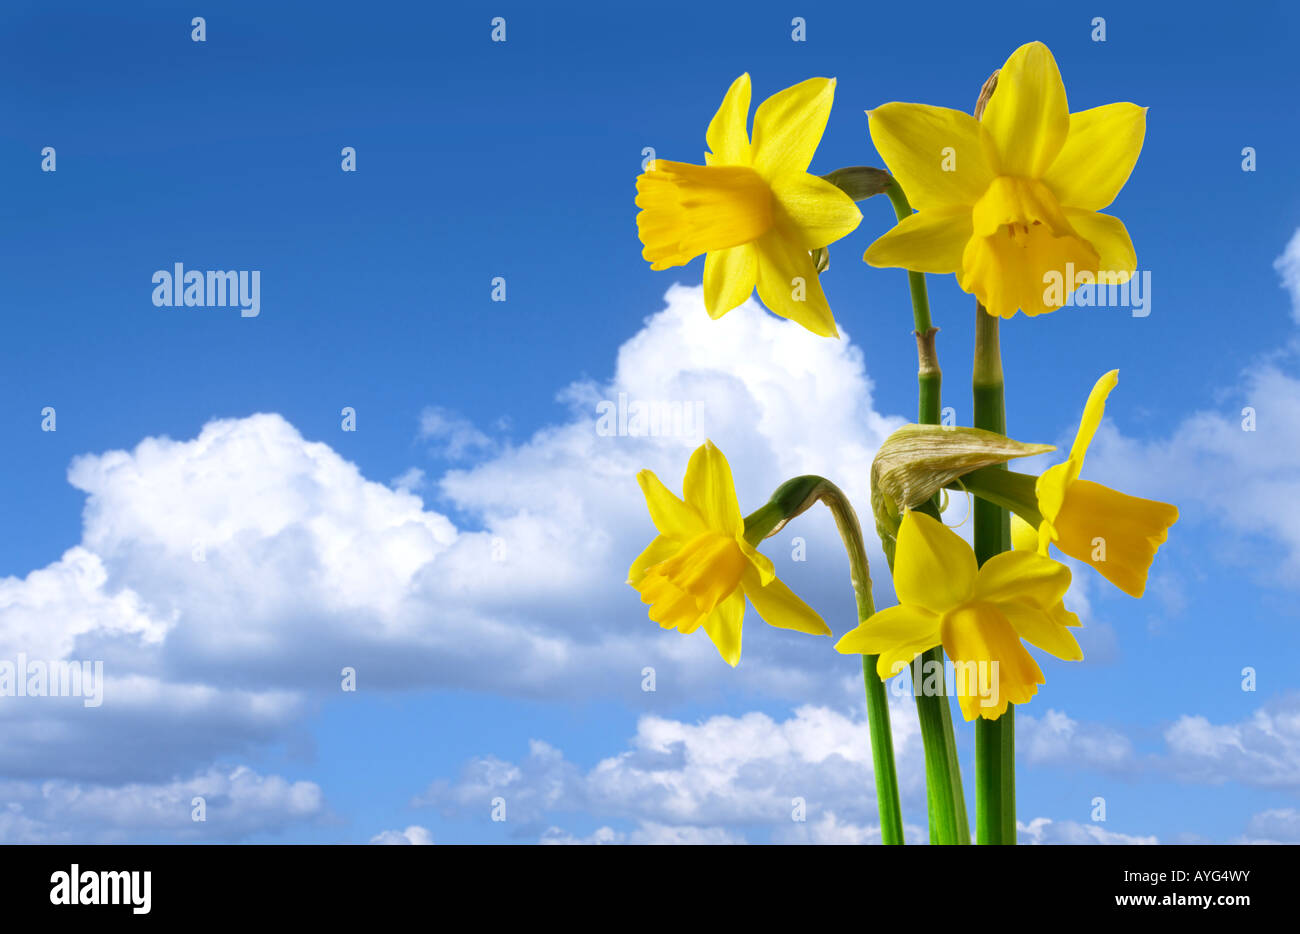 Daffodils against a blue sky with clouds. Stock Photo